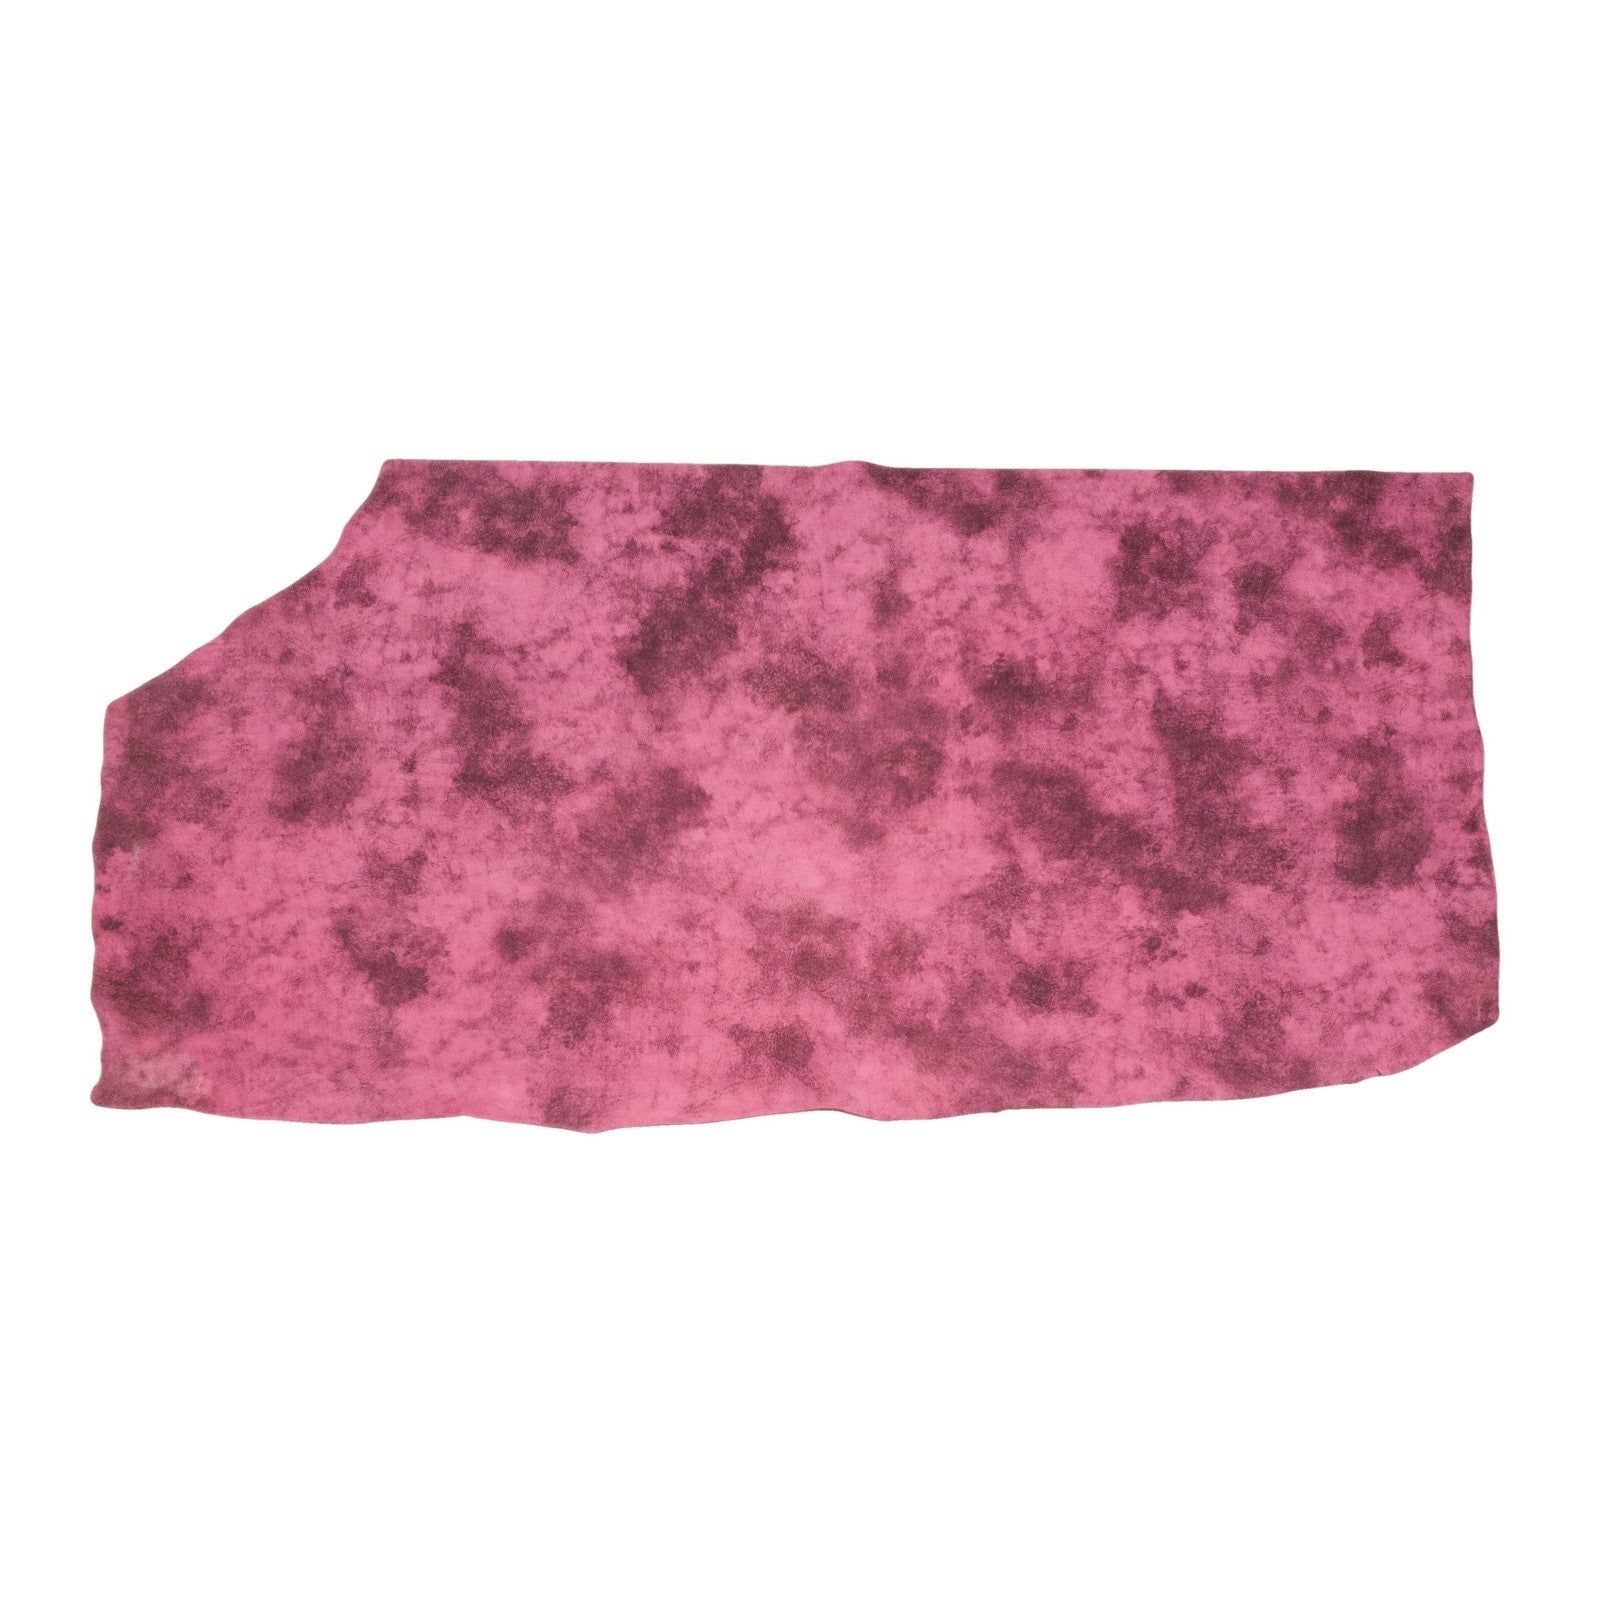 Scuba Suede, 3-4 oz, 8-17 sq ft, Cow Sides, Pink / 8-9 Sq Ft | The Leather Guy